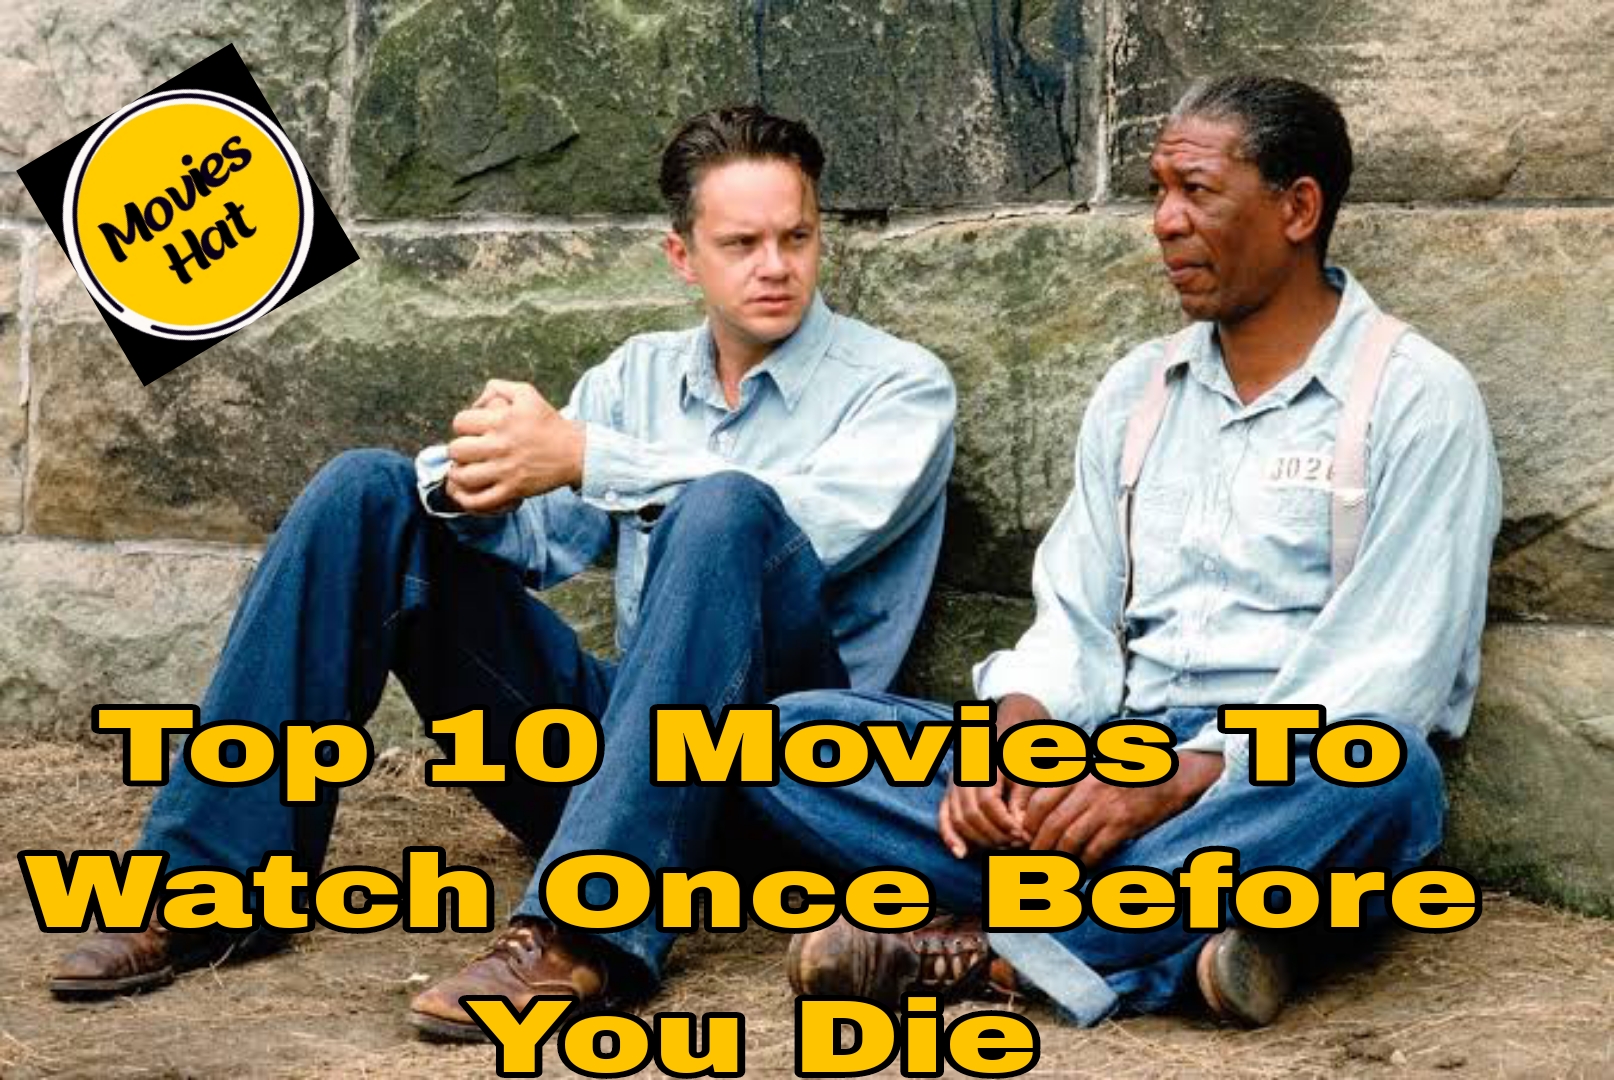 Top 10 Movies To Watch Once Before You Die